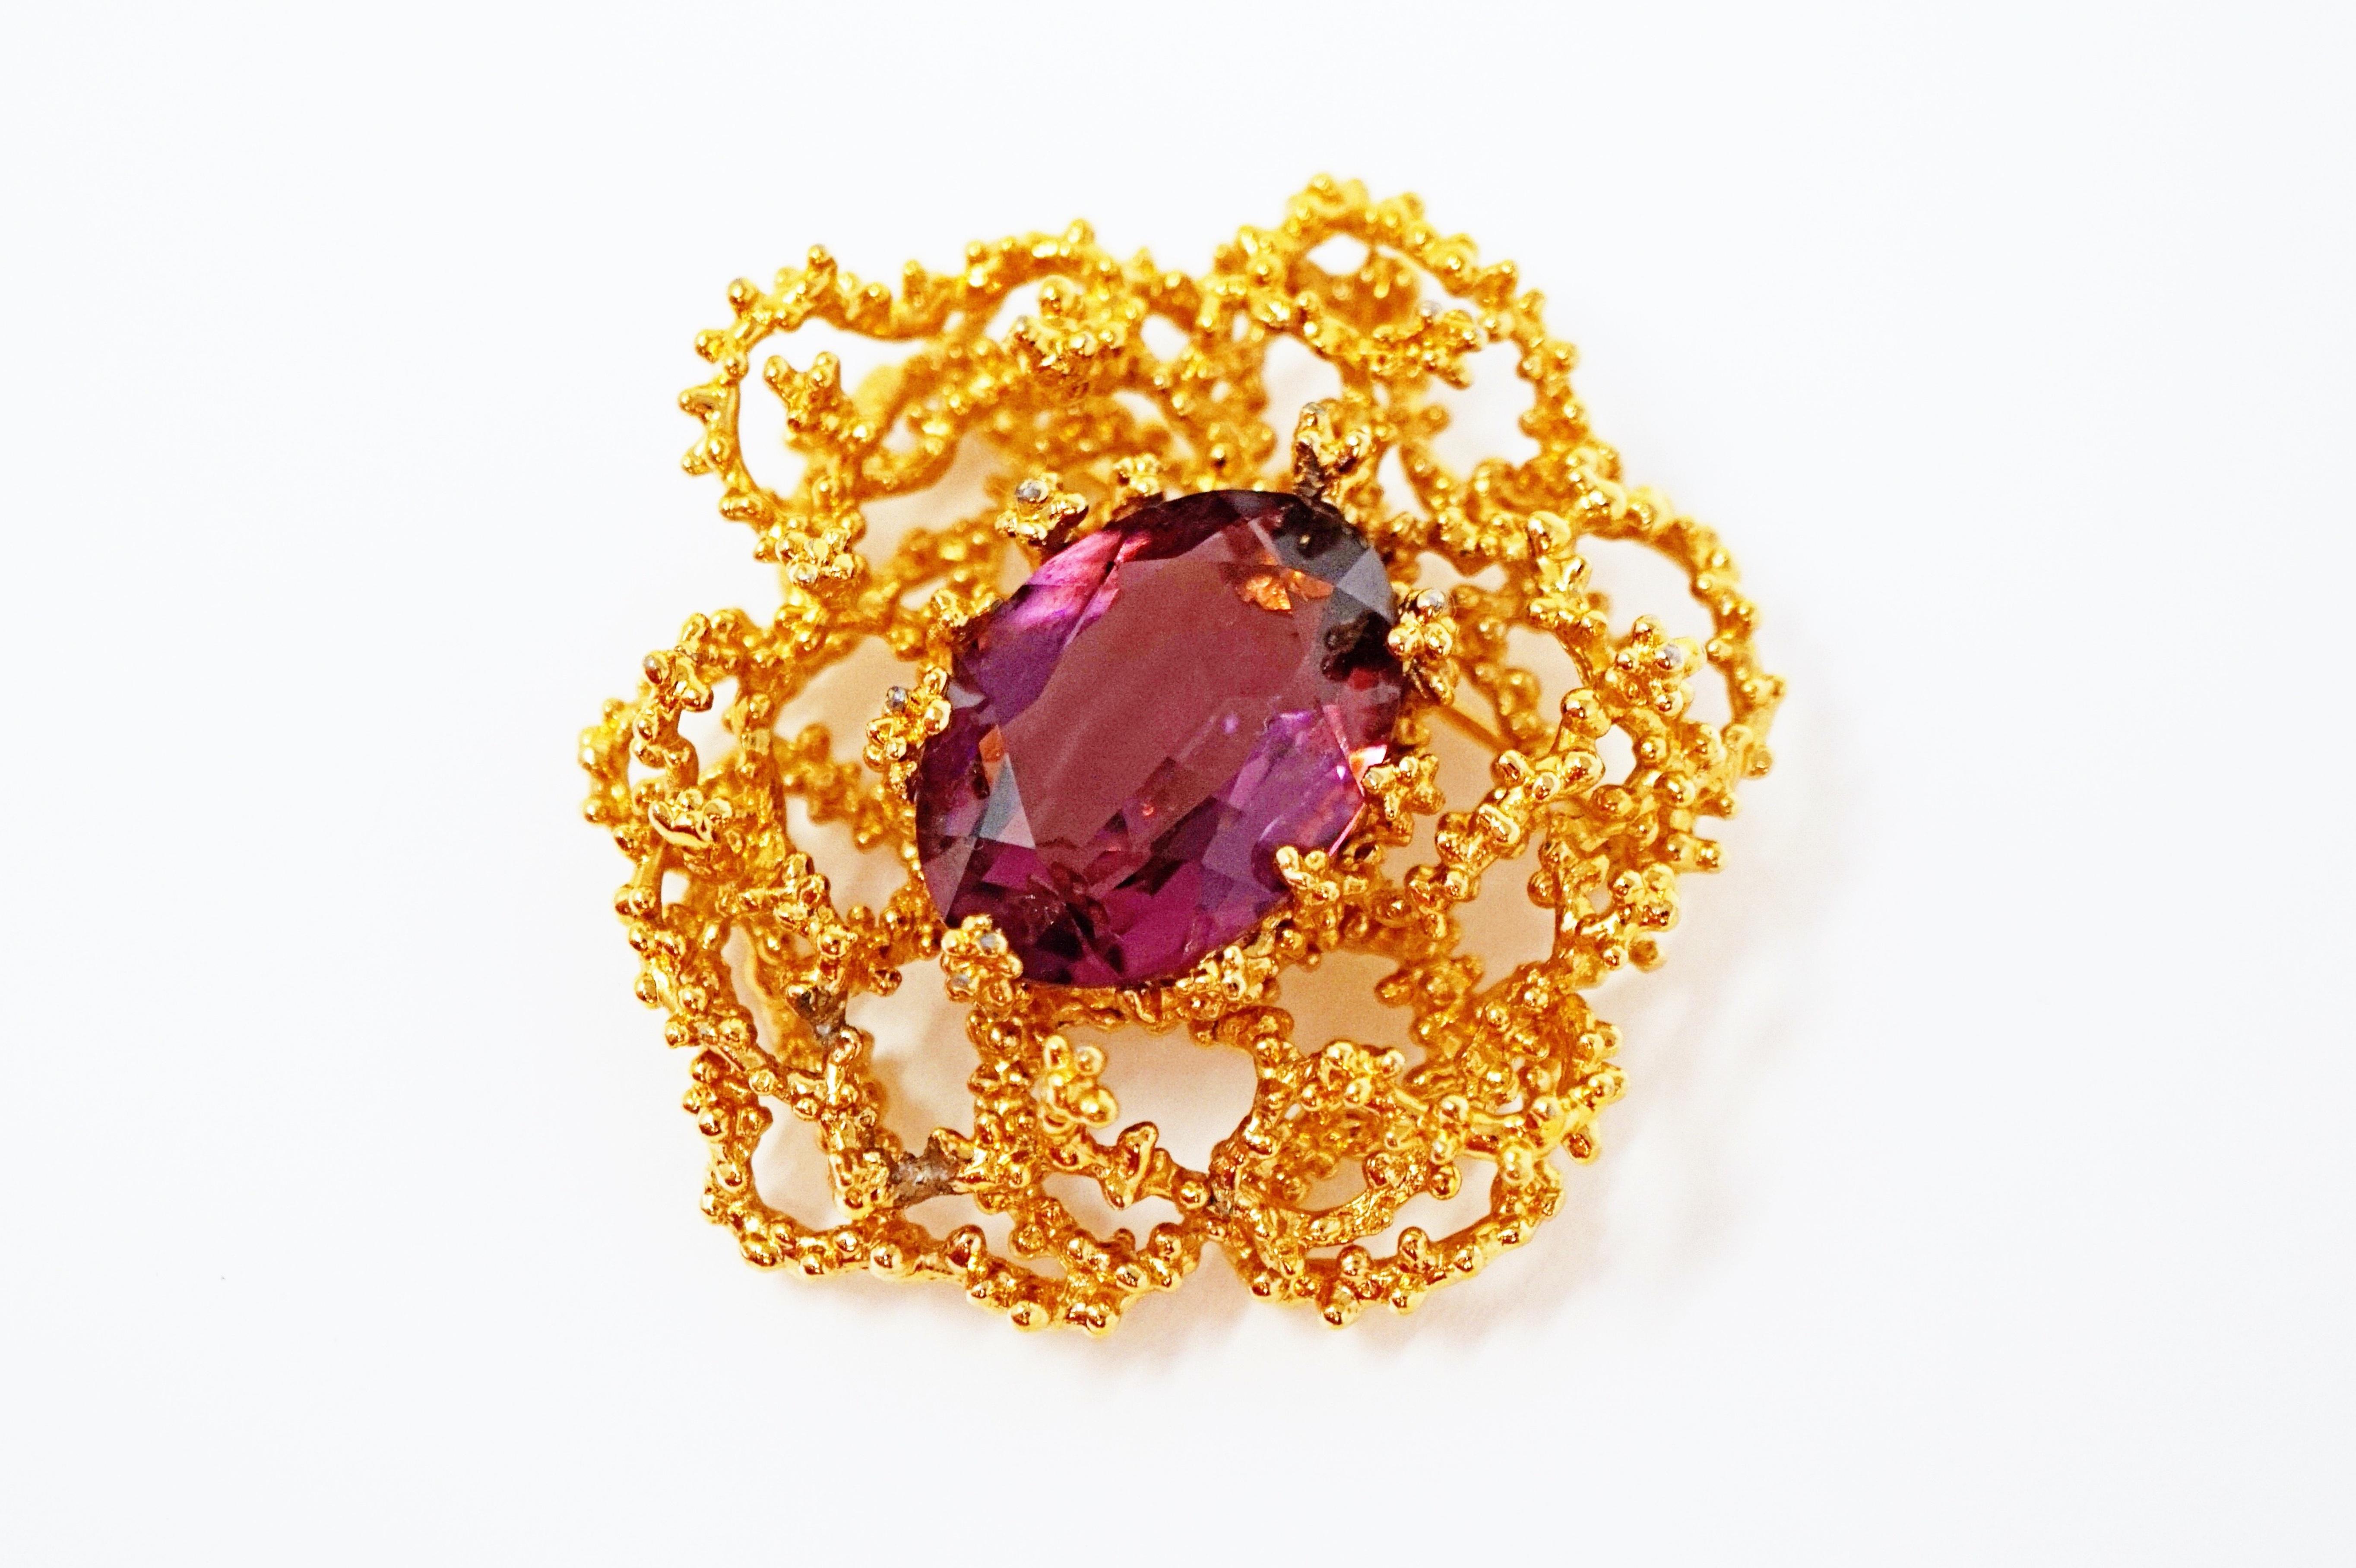 Women's Gilded Brutalist Brooch with Amethyst Crystal by Panetta, Signed, circa 1960